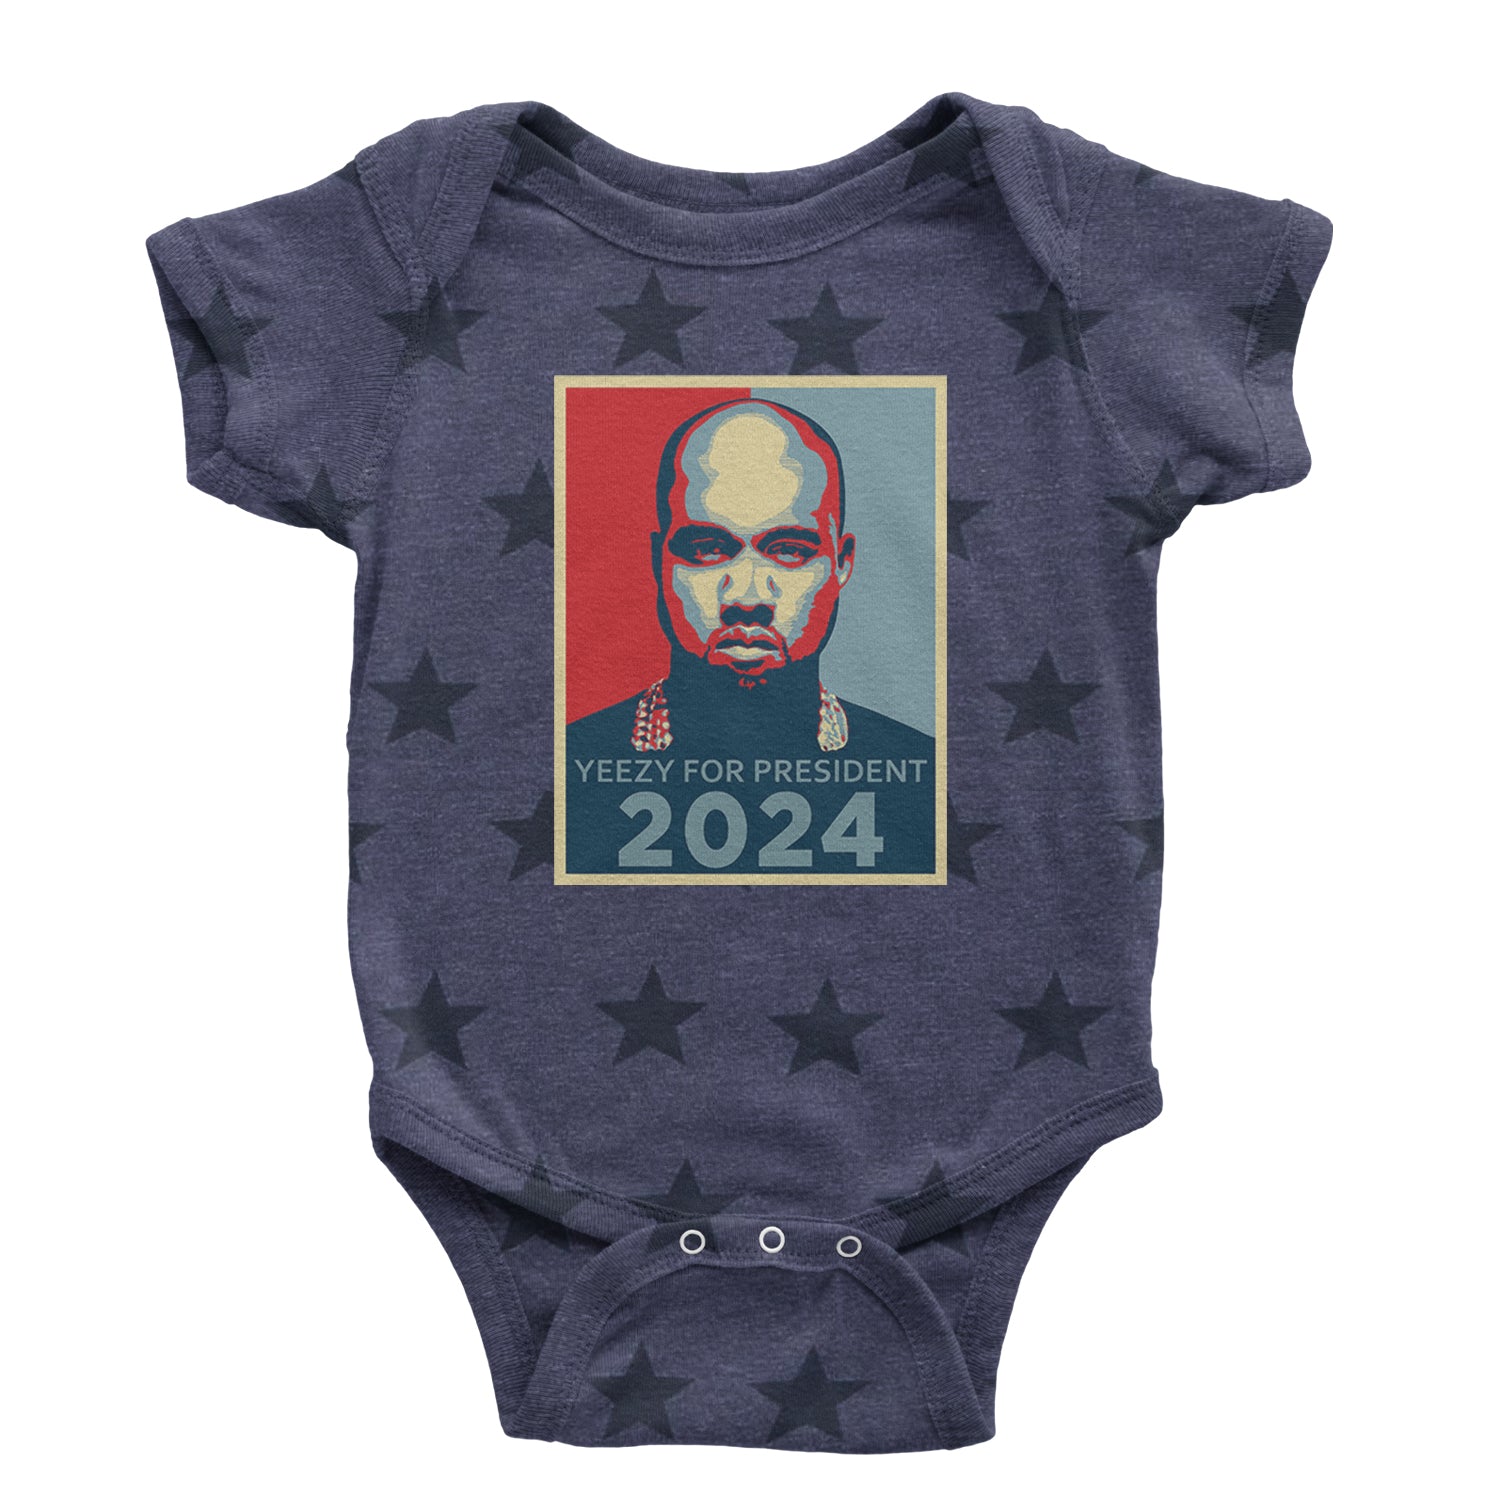 Yeezus For President Vote for Ye Infant One-Piece Romper Bodysuit and Toddler T-shirt Navy Blue STAR